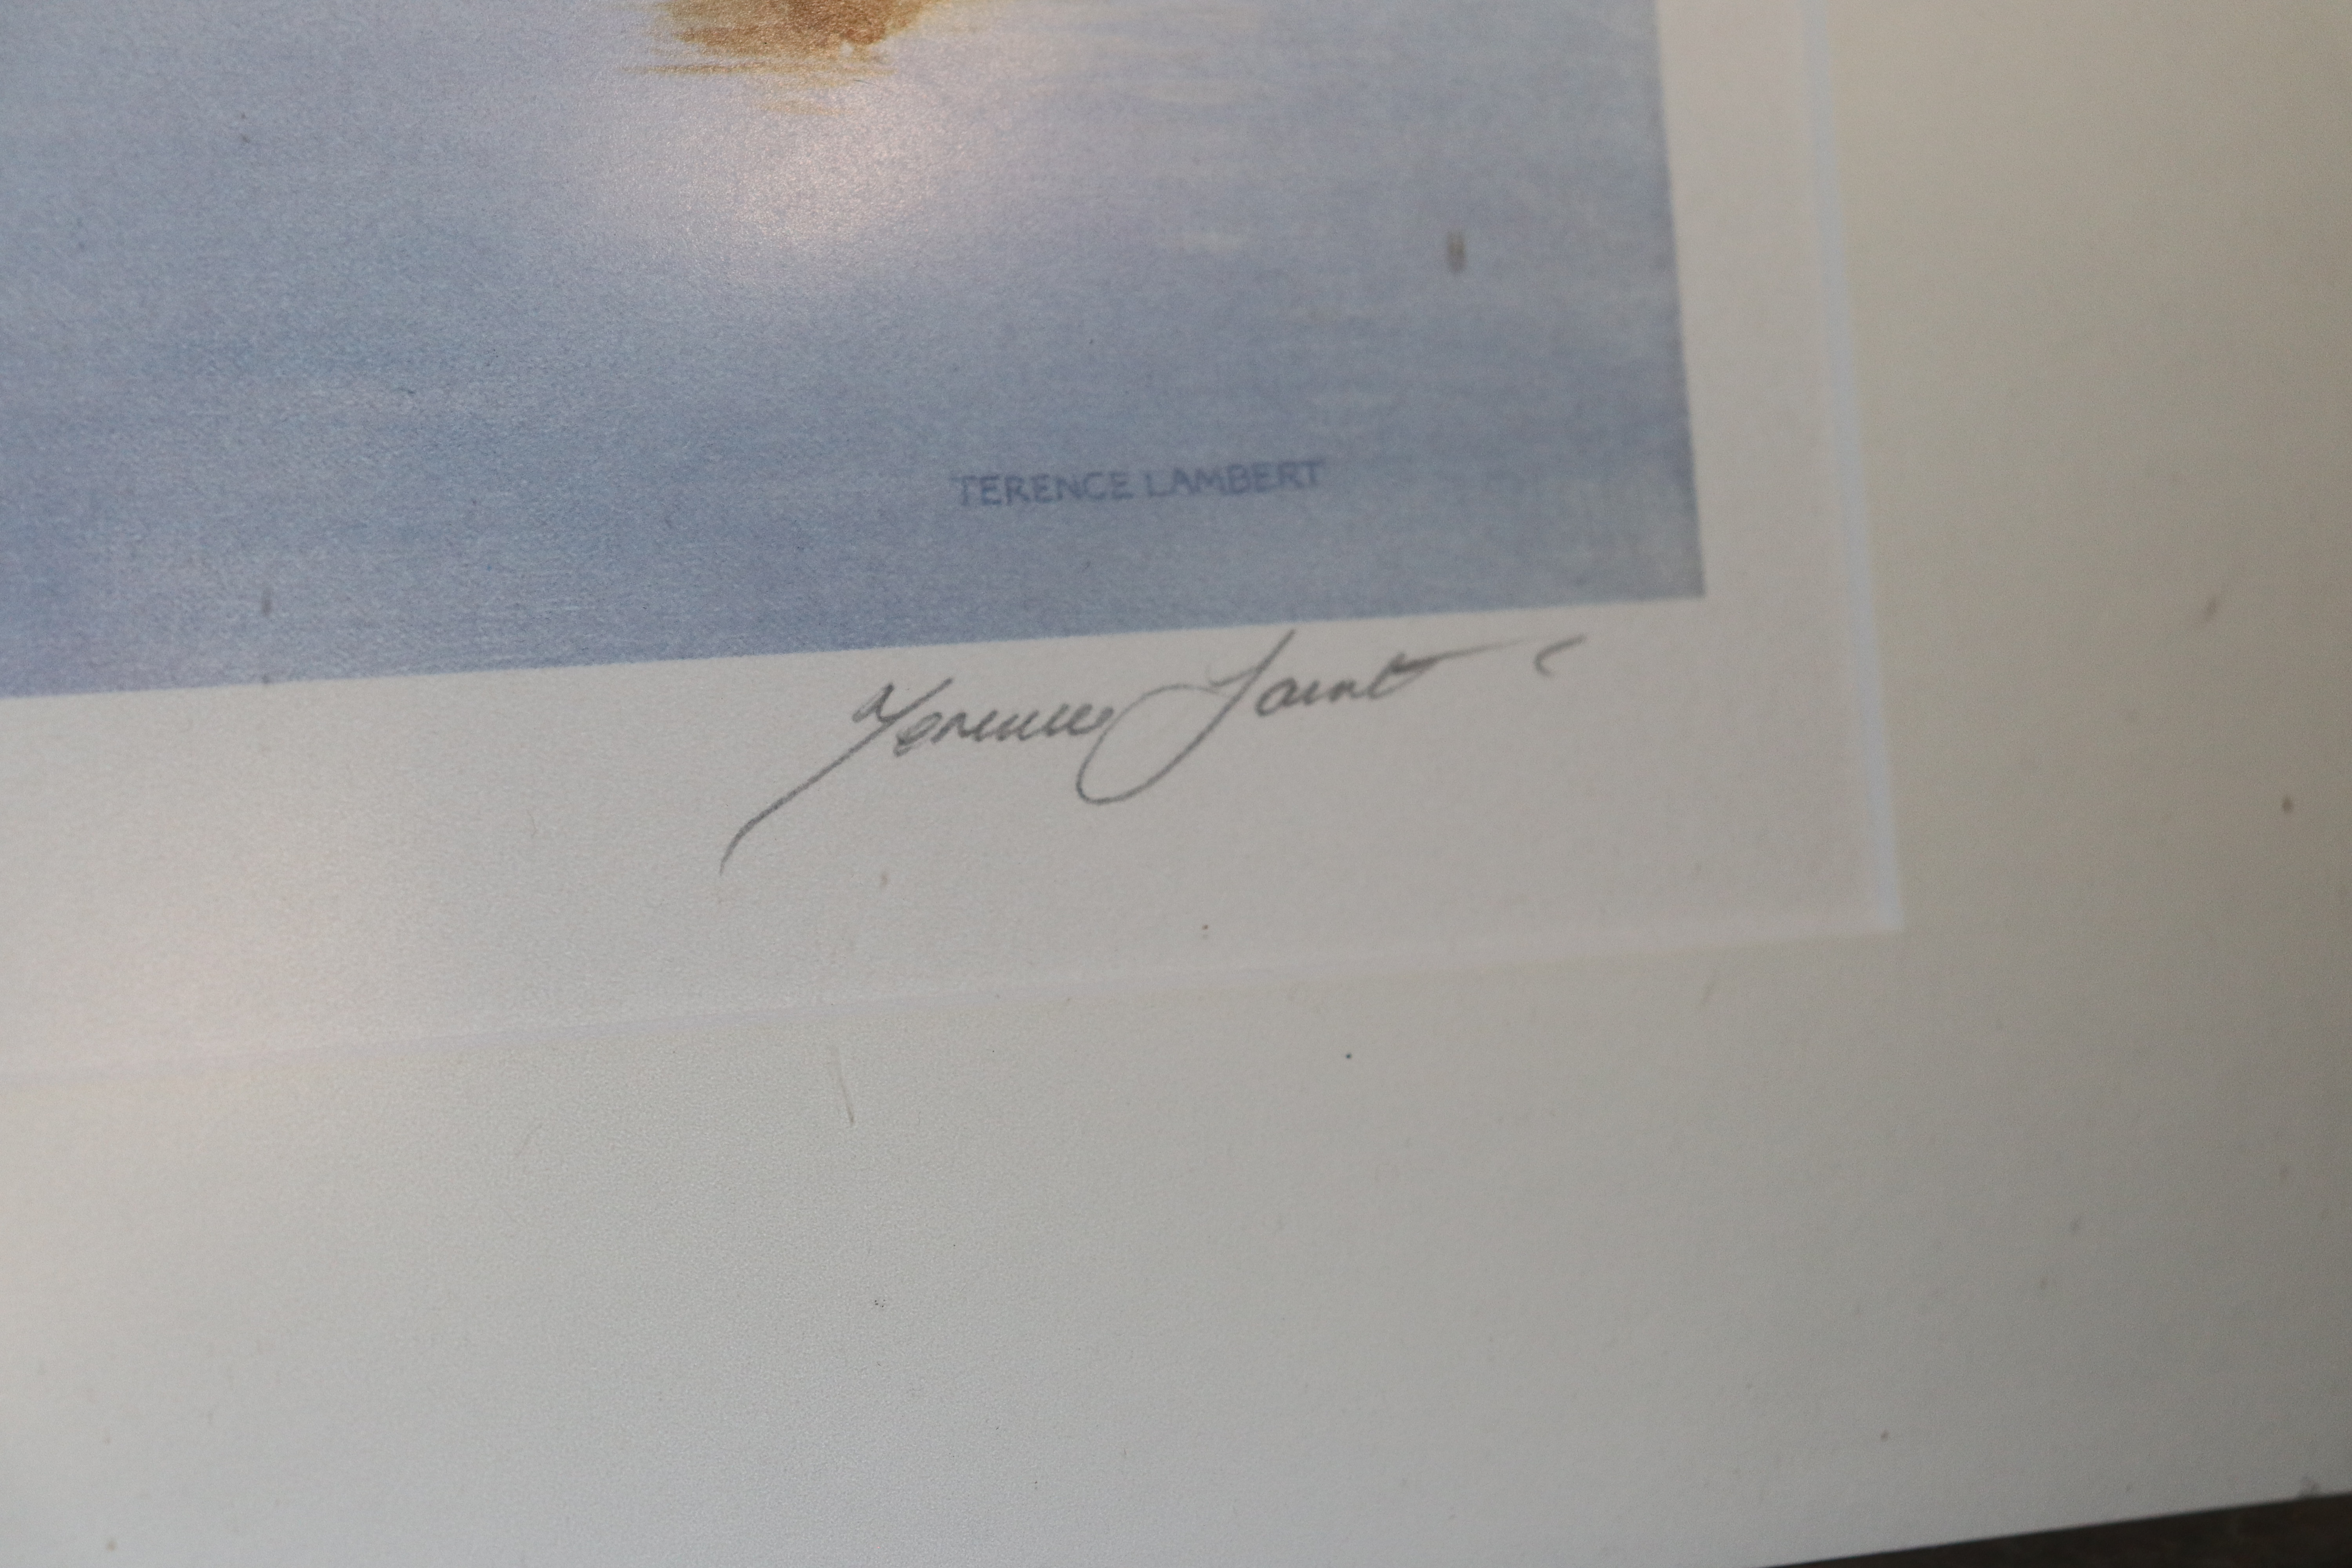 A Terence Lambert, pencil signed limited edition p - Image 3 of 3